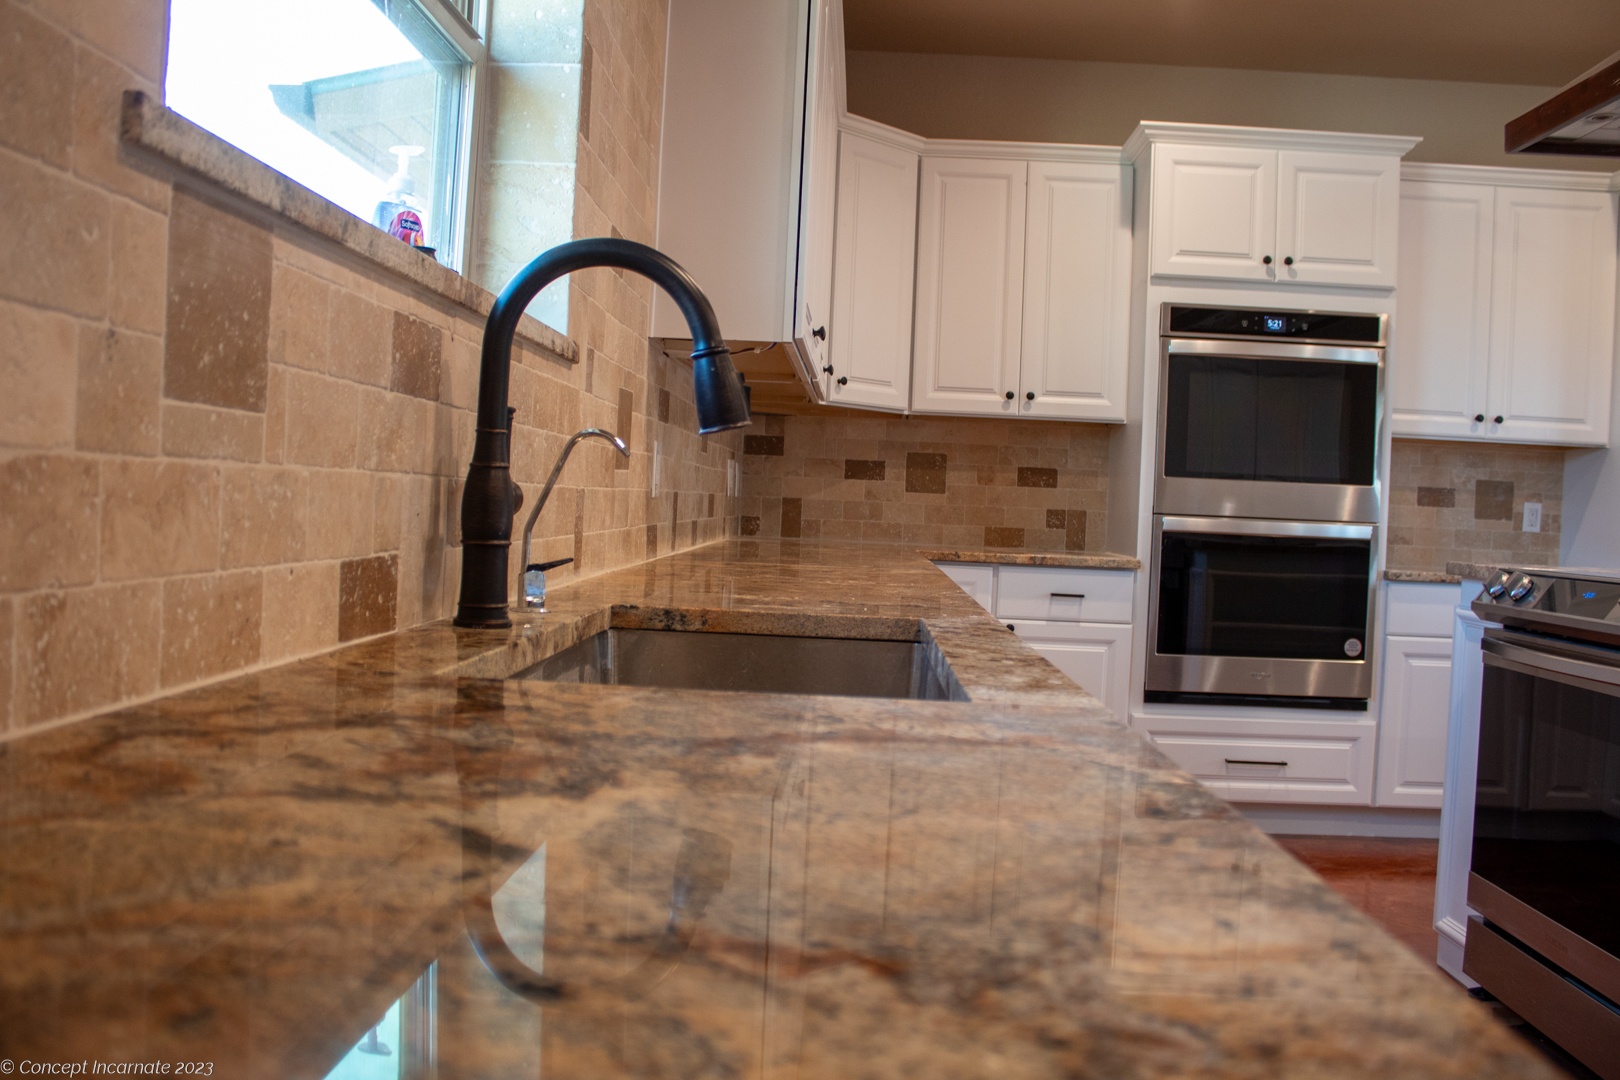 Granit counters with under mount sink